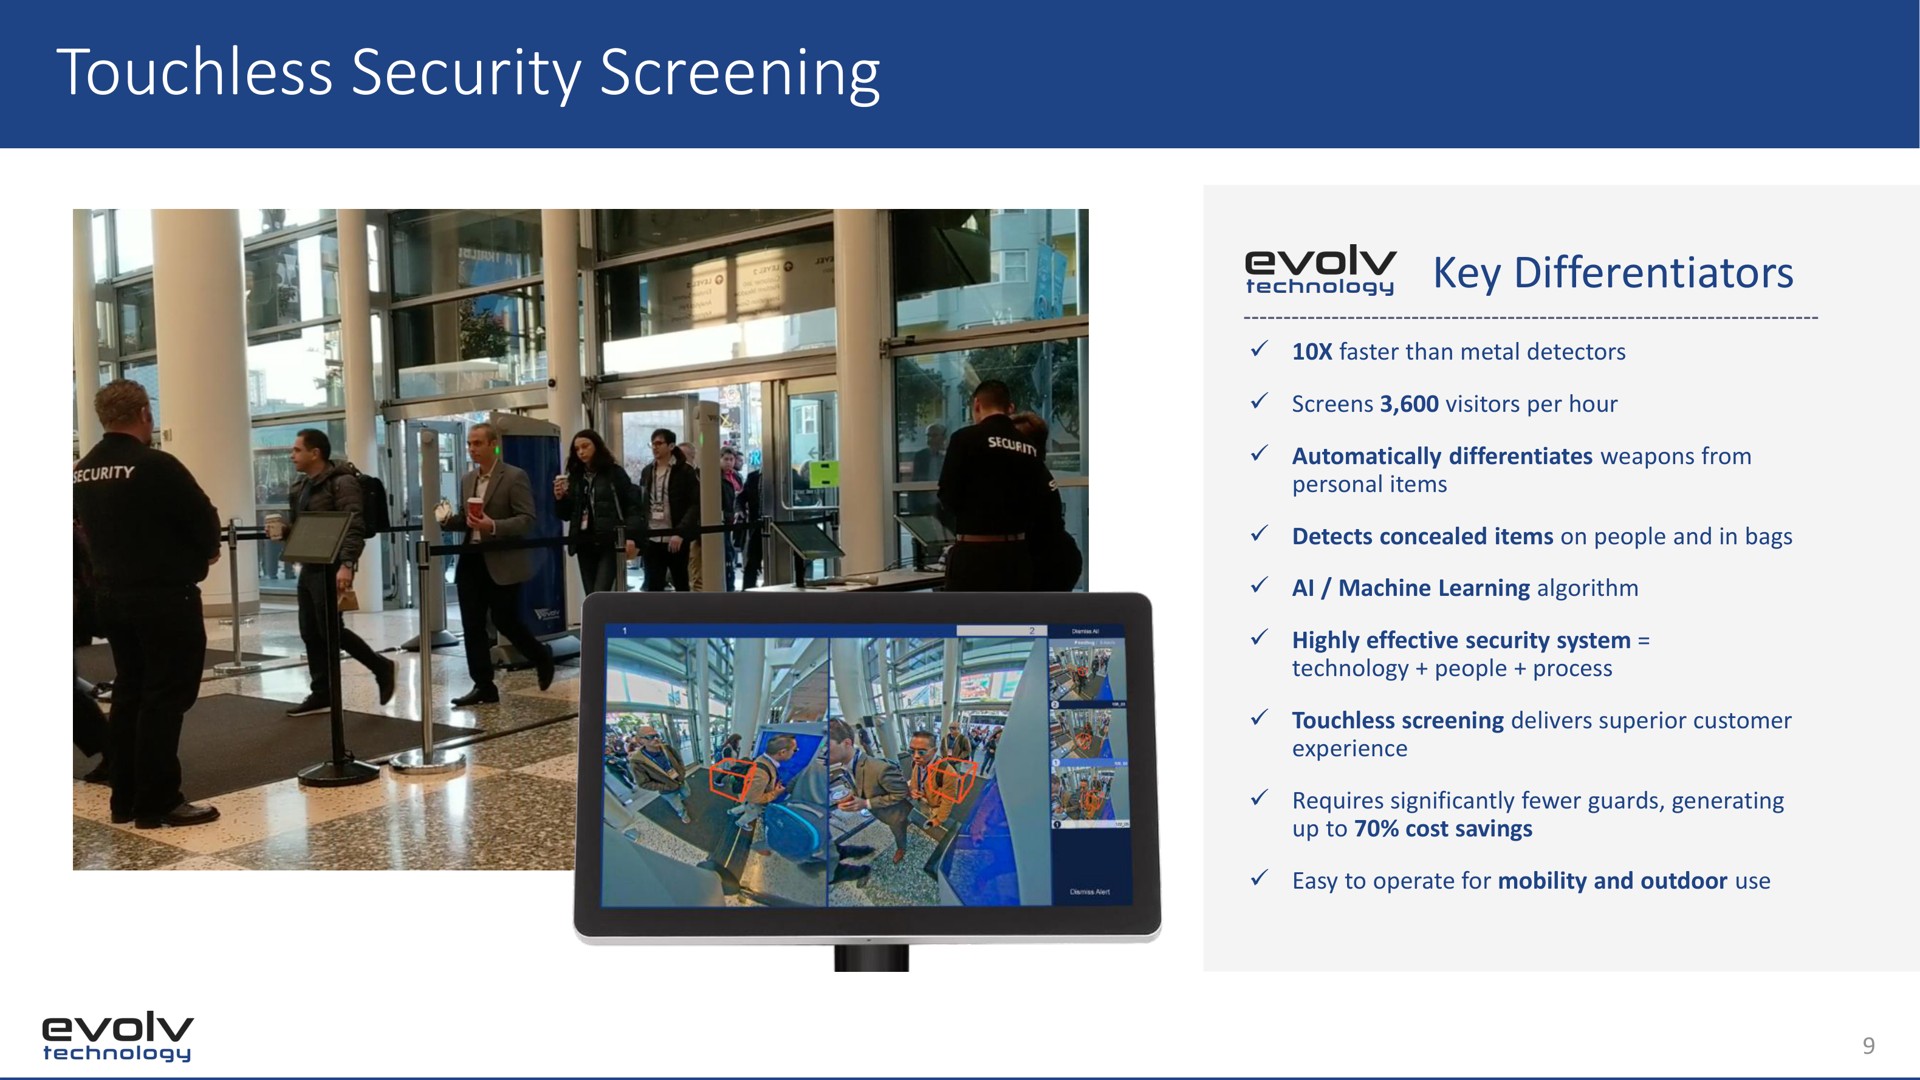 touchless security screening key differentiators | Evolv